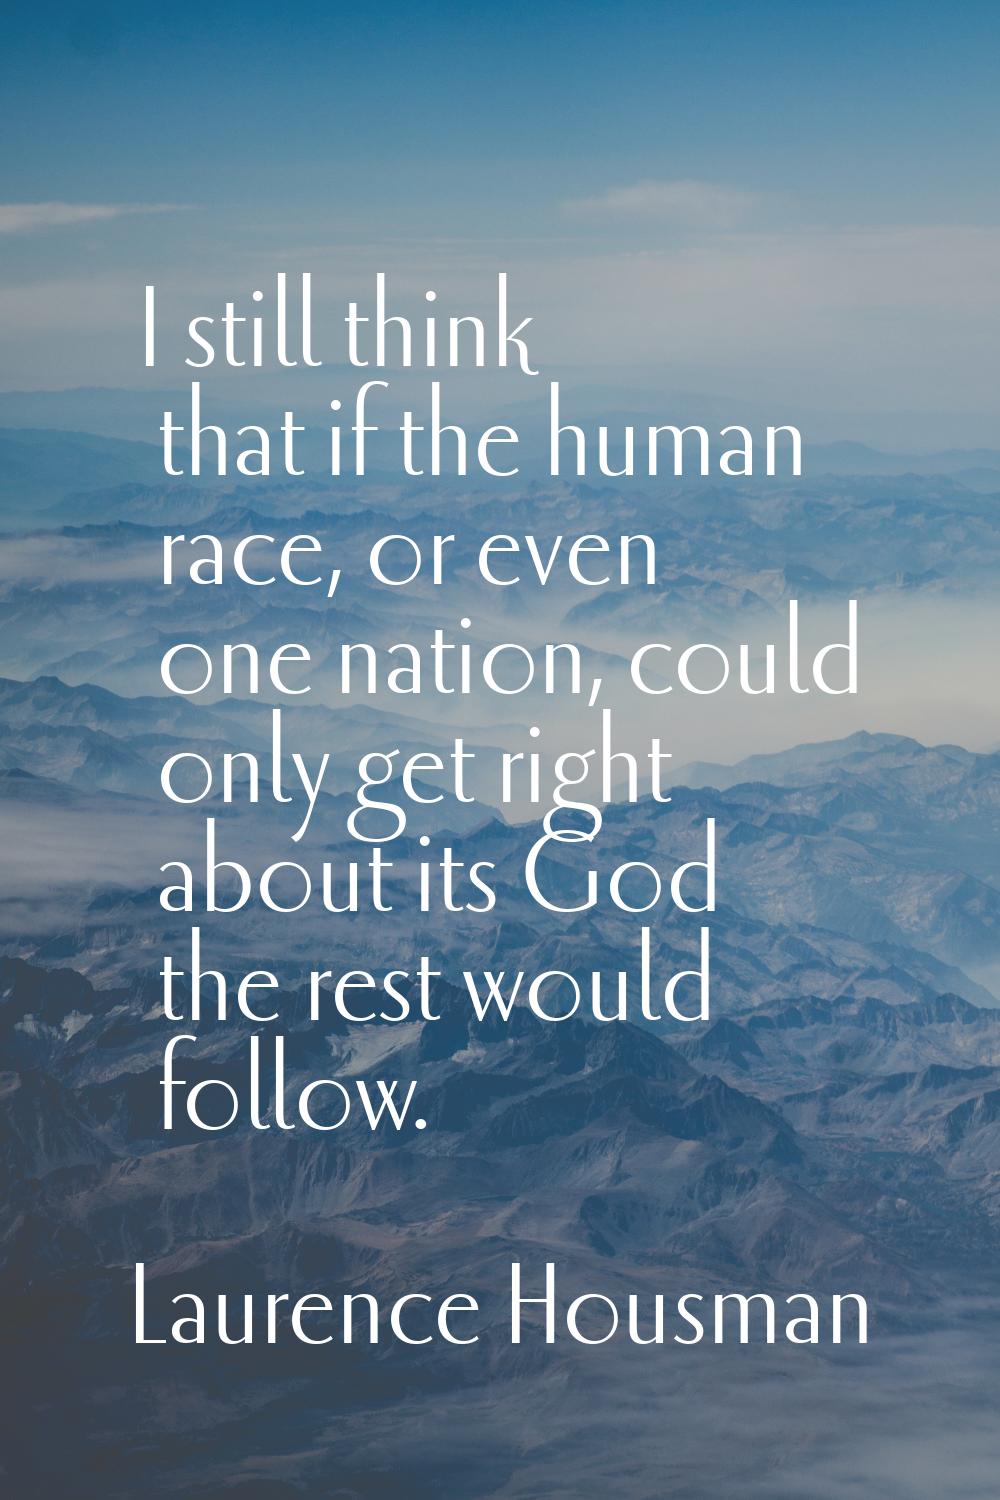 I still think that if the human race, or even one nation, could only get right about its God the re